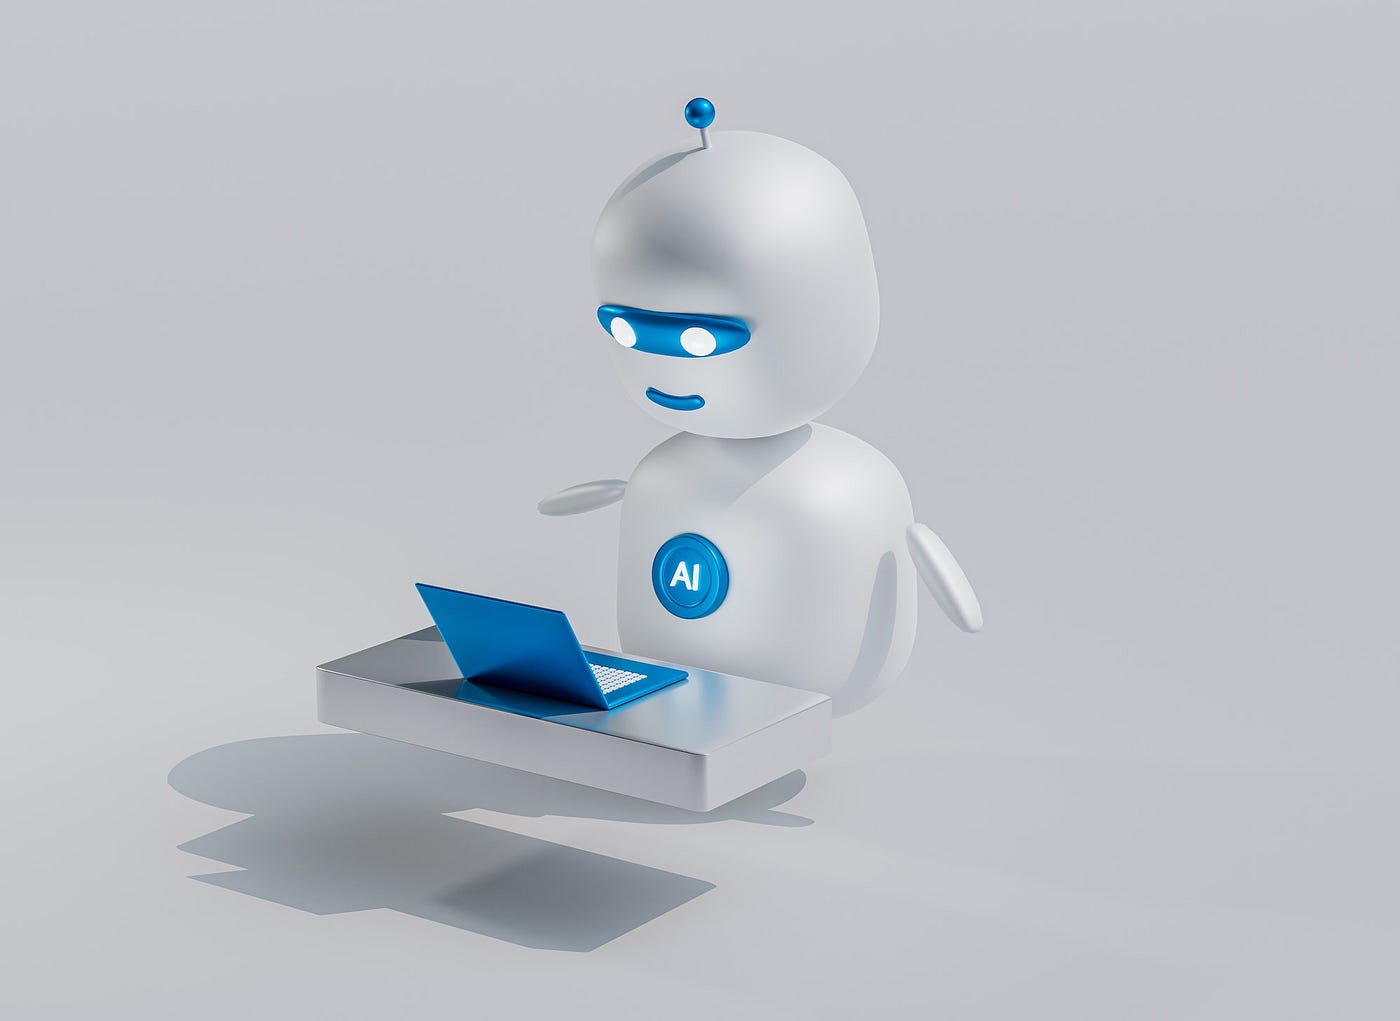 Stylized representation of an AI robot with a digital face and an "AI" badge, using a laptop, suggesting a theme of technology and automation.